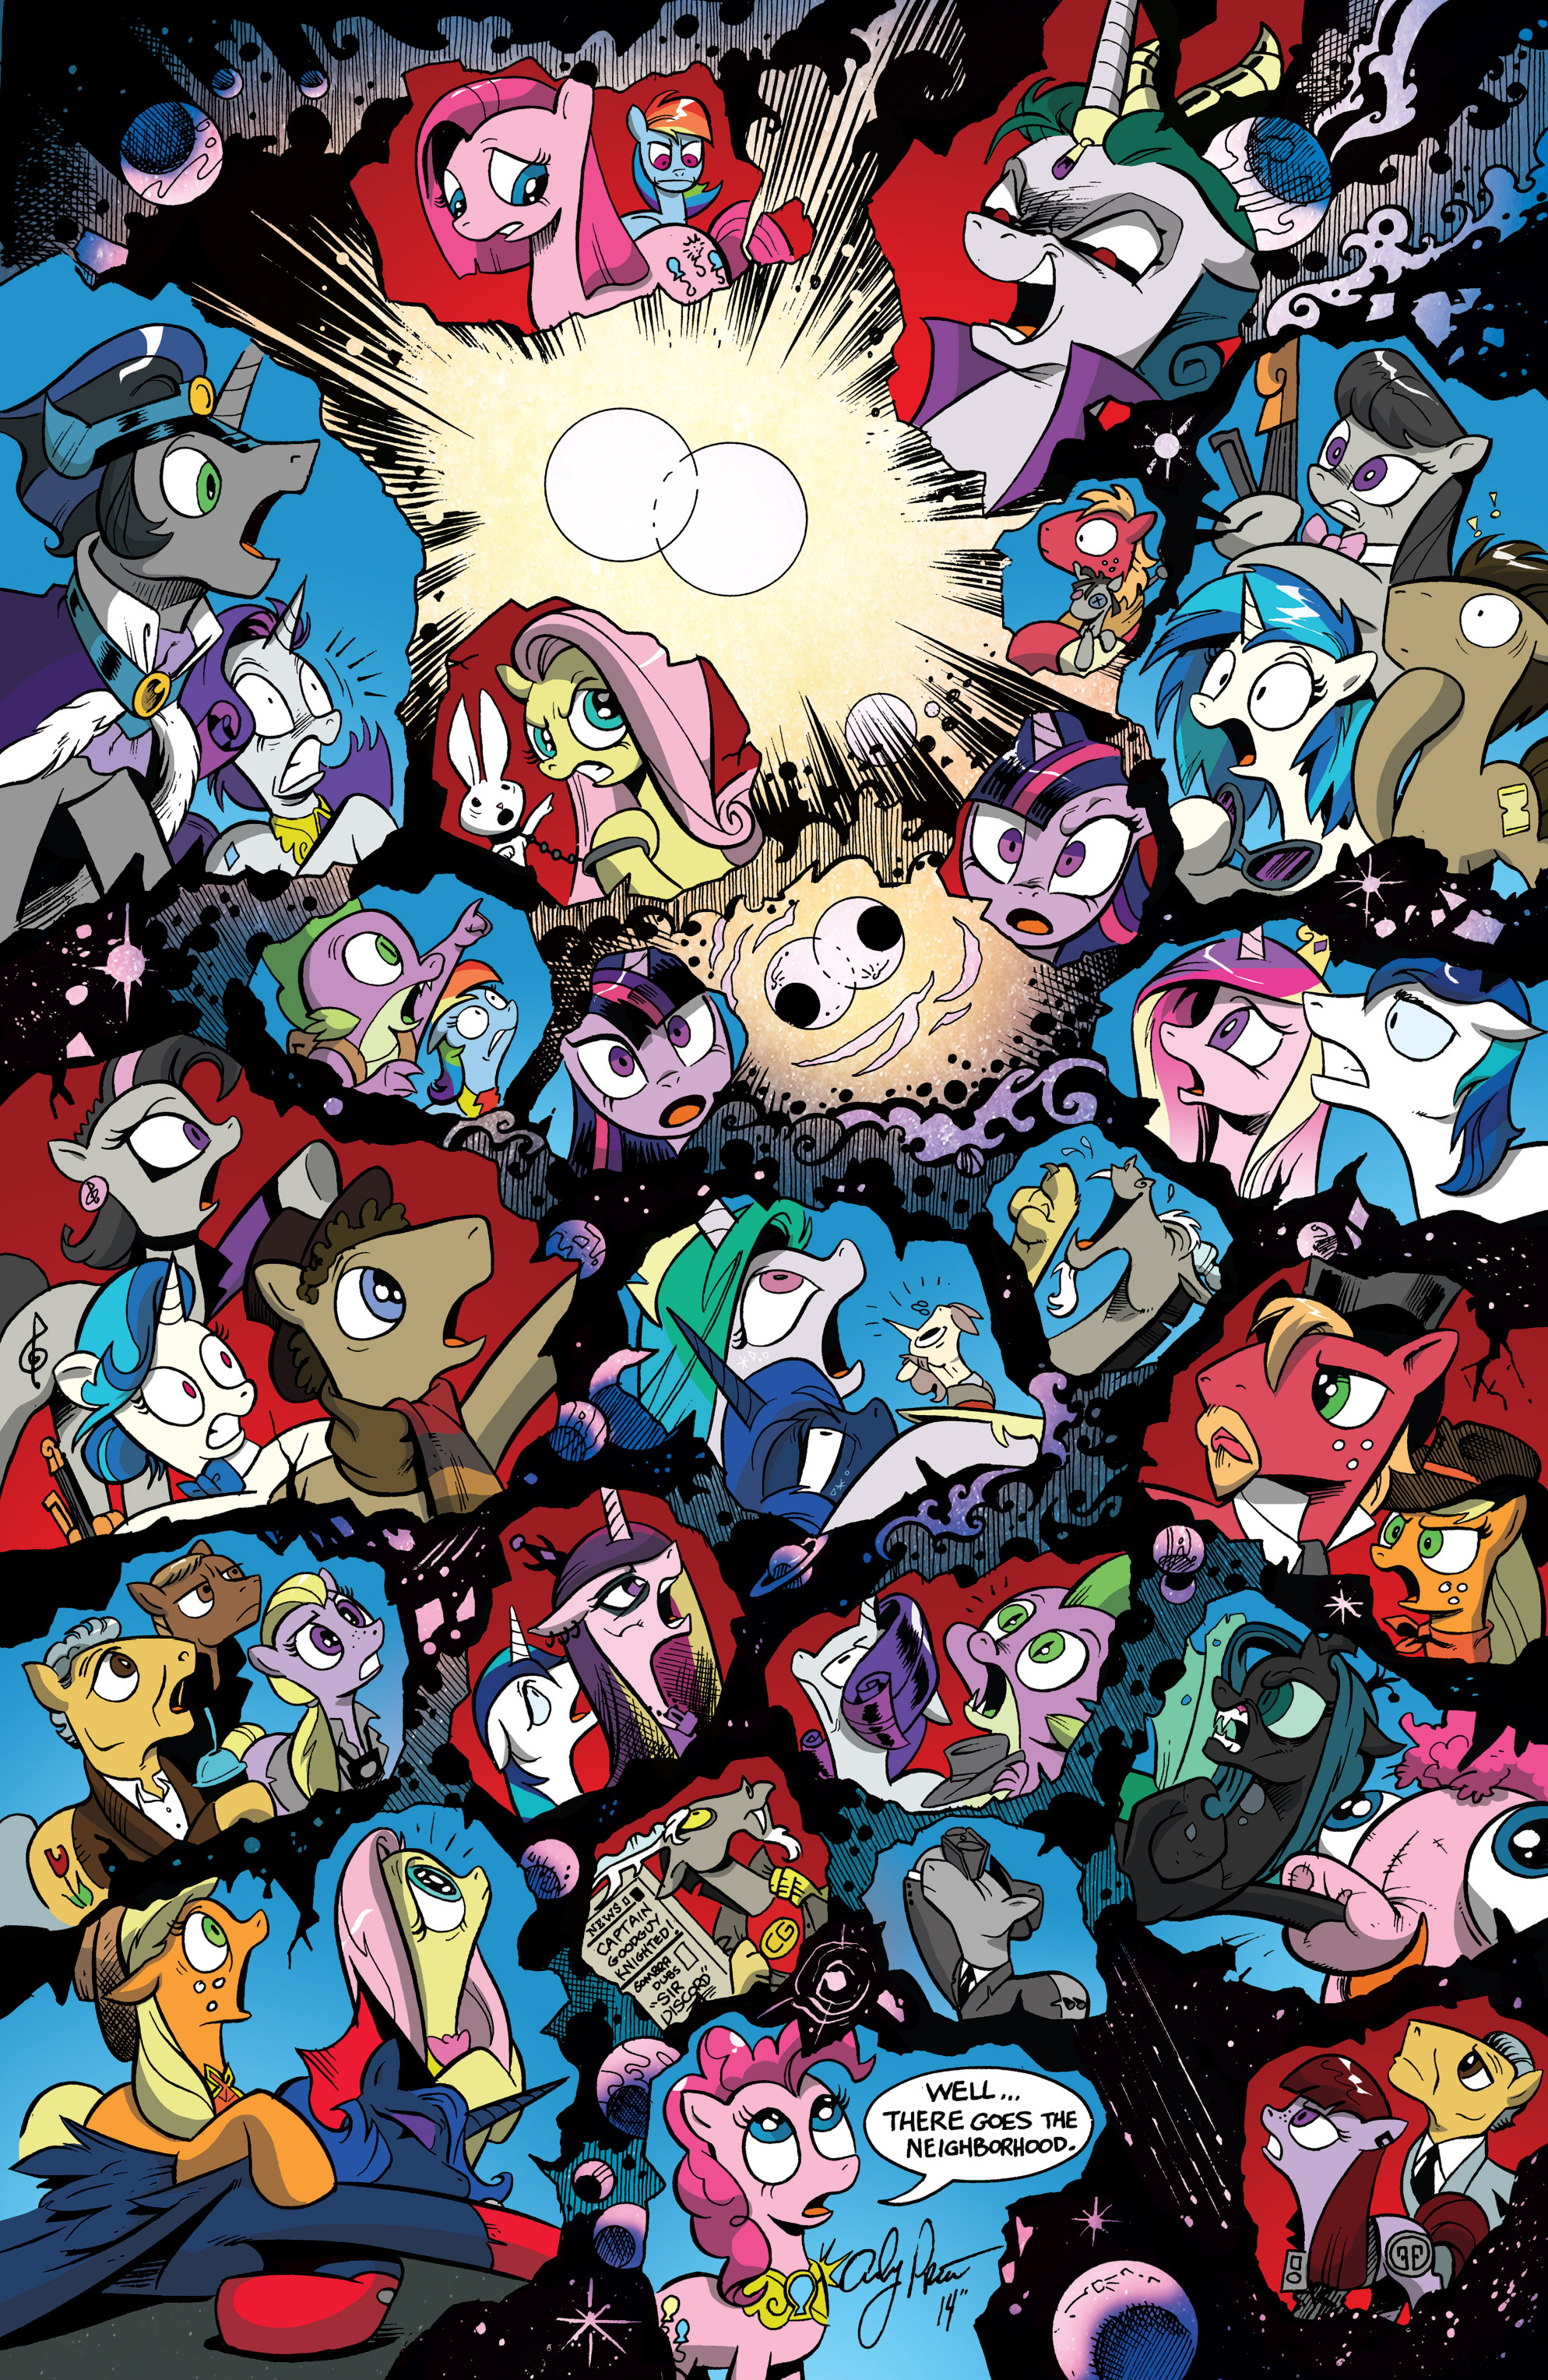 Read online My Little Pony: Friendship is Magic comic -  Issue #20 - 14